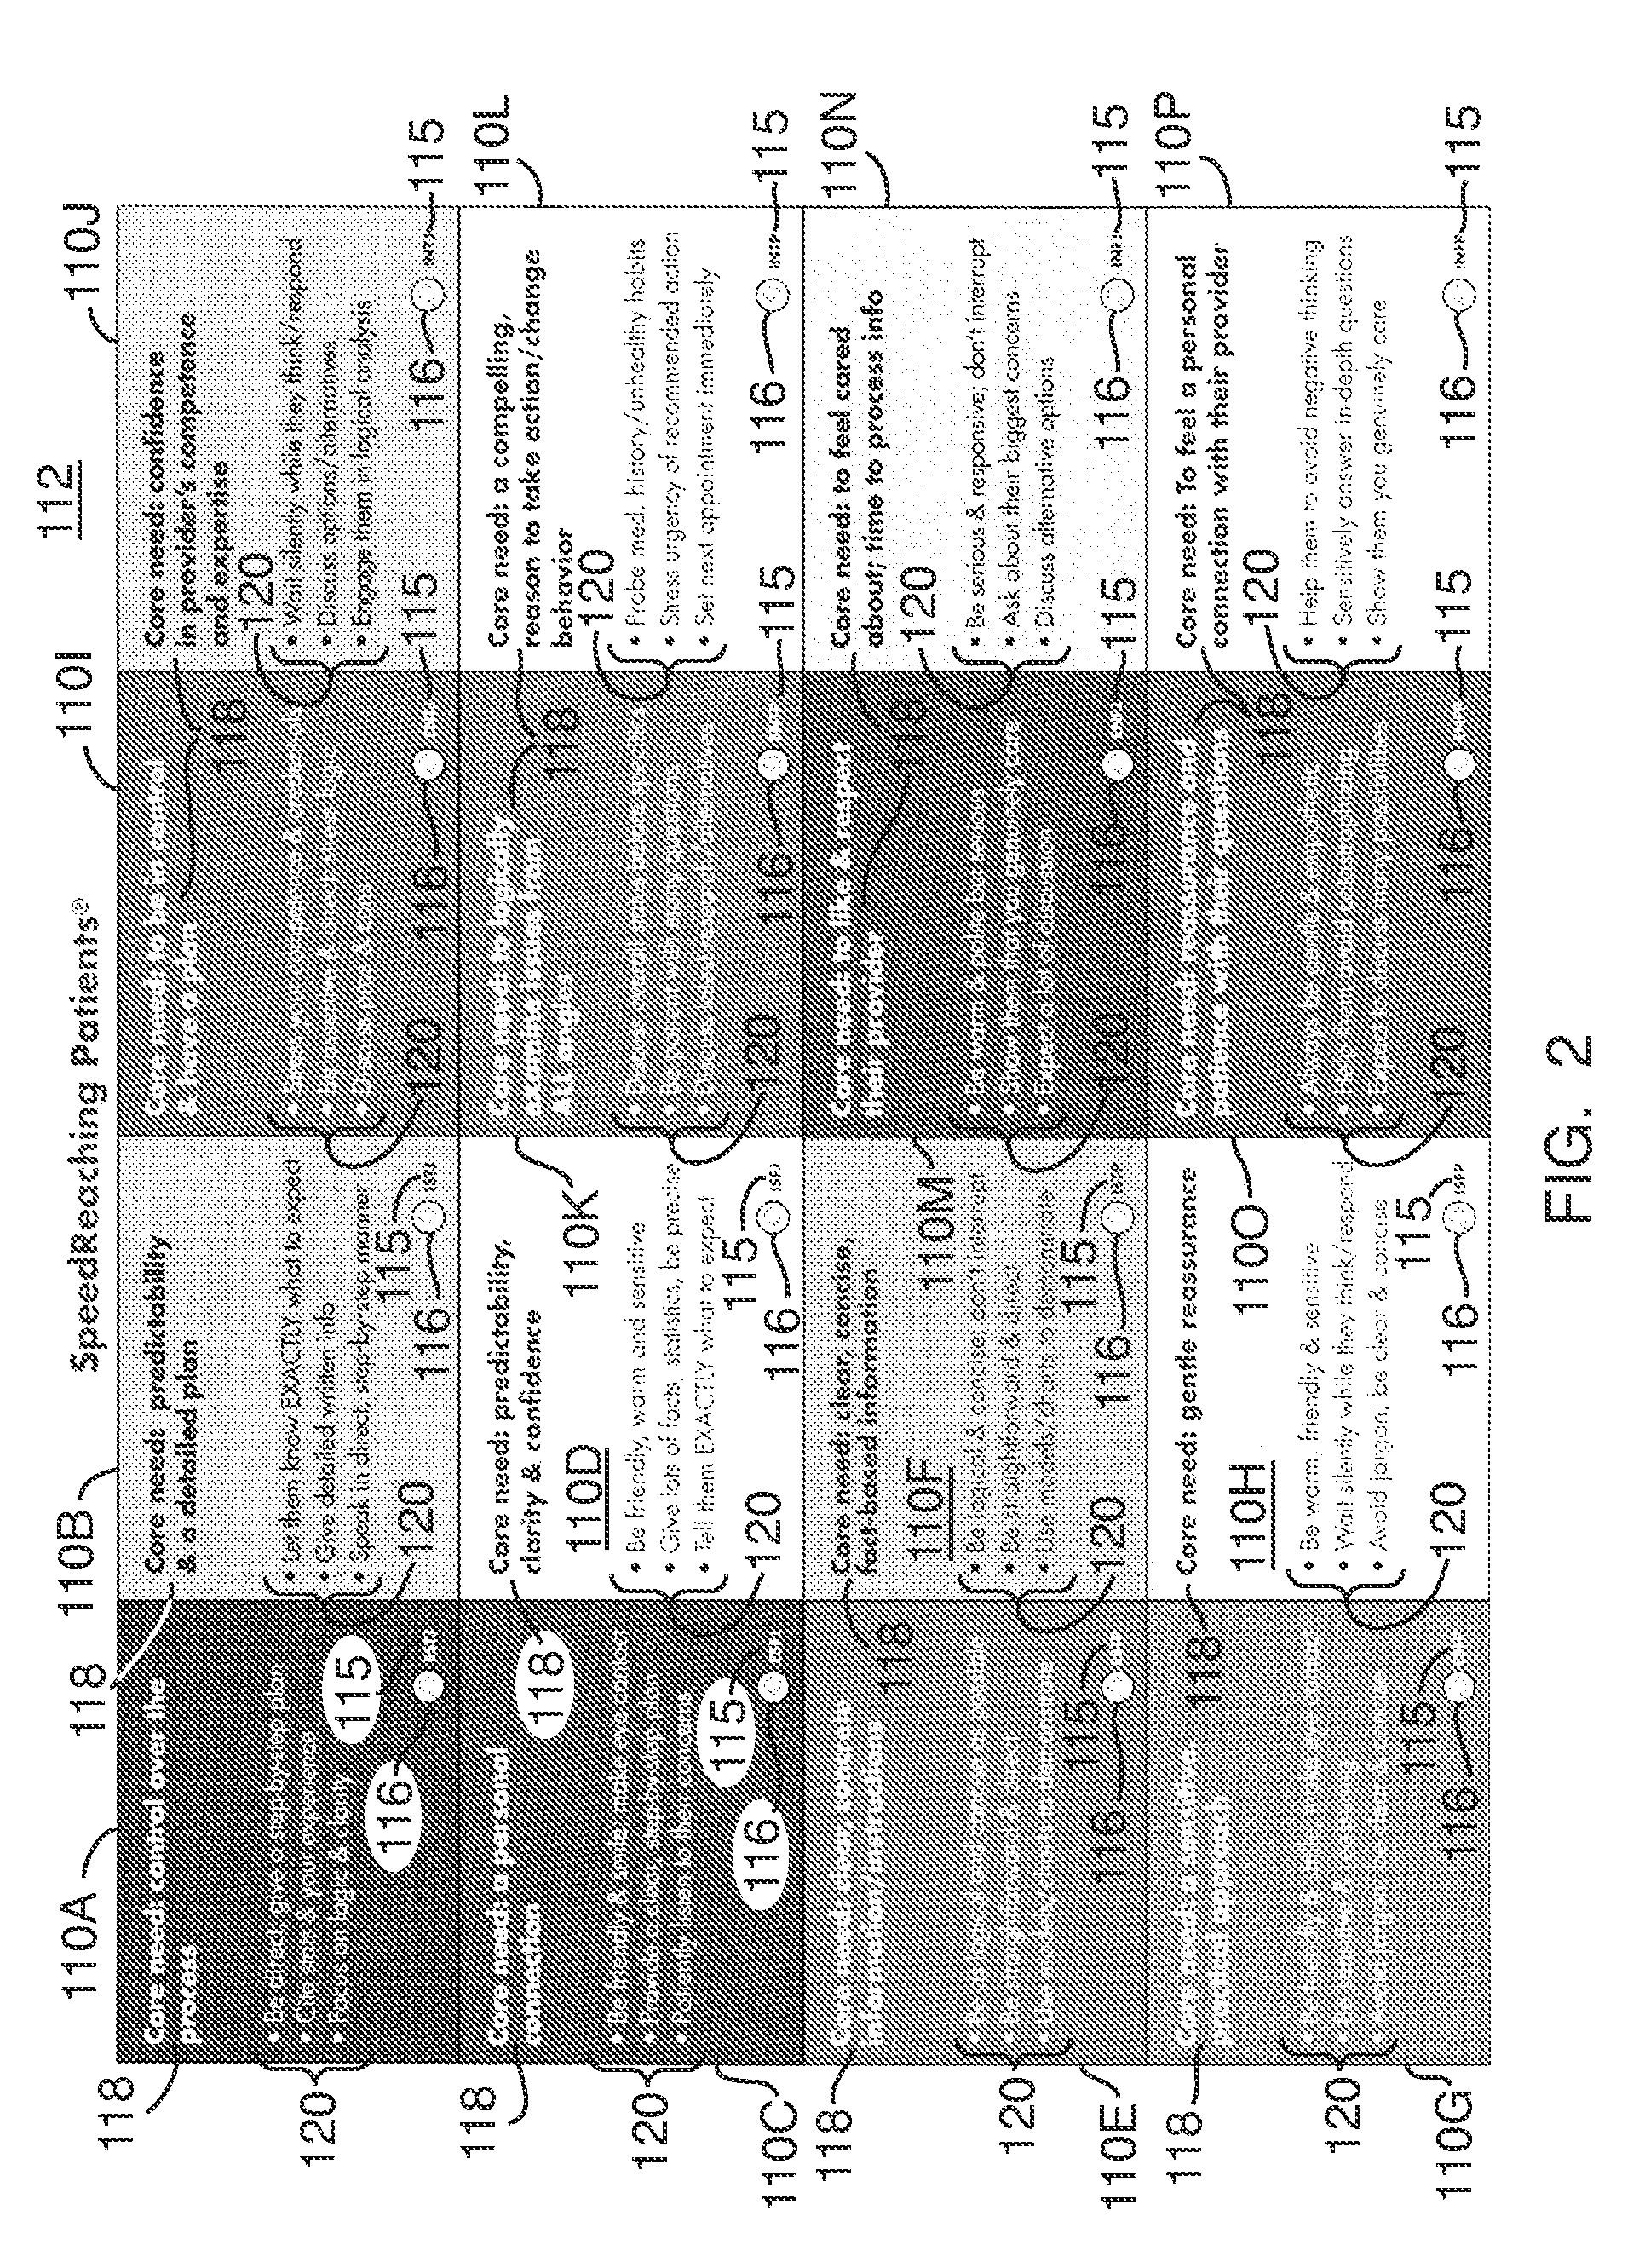 System and Method for Improving Communications with a Patient